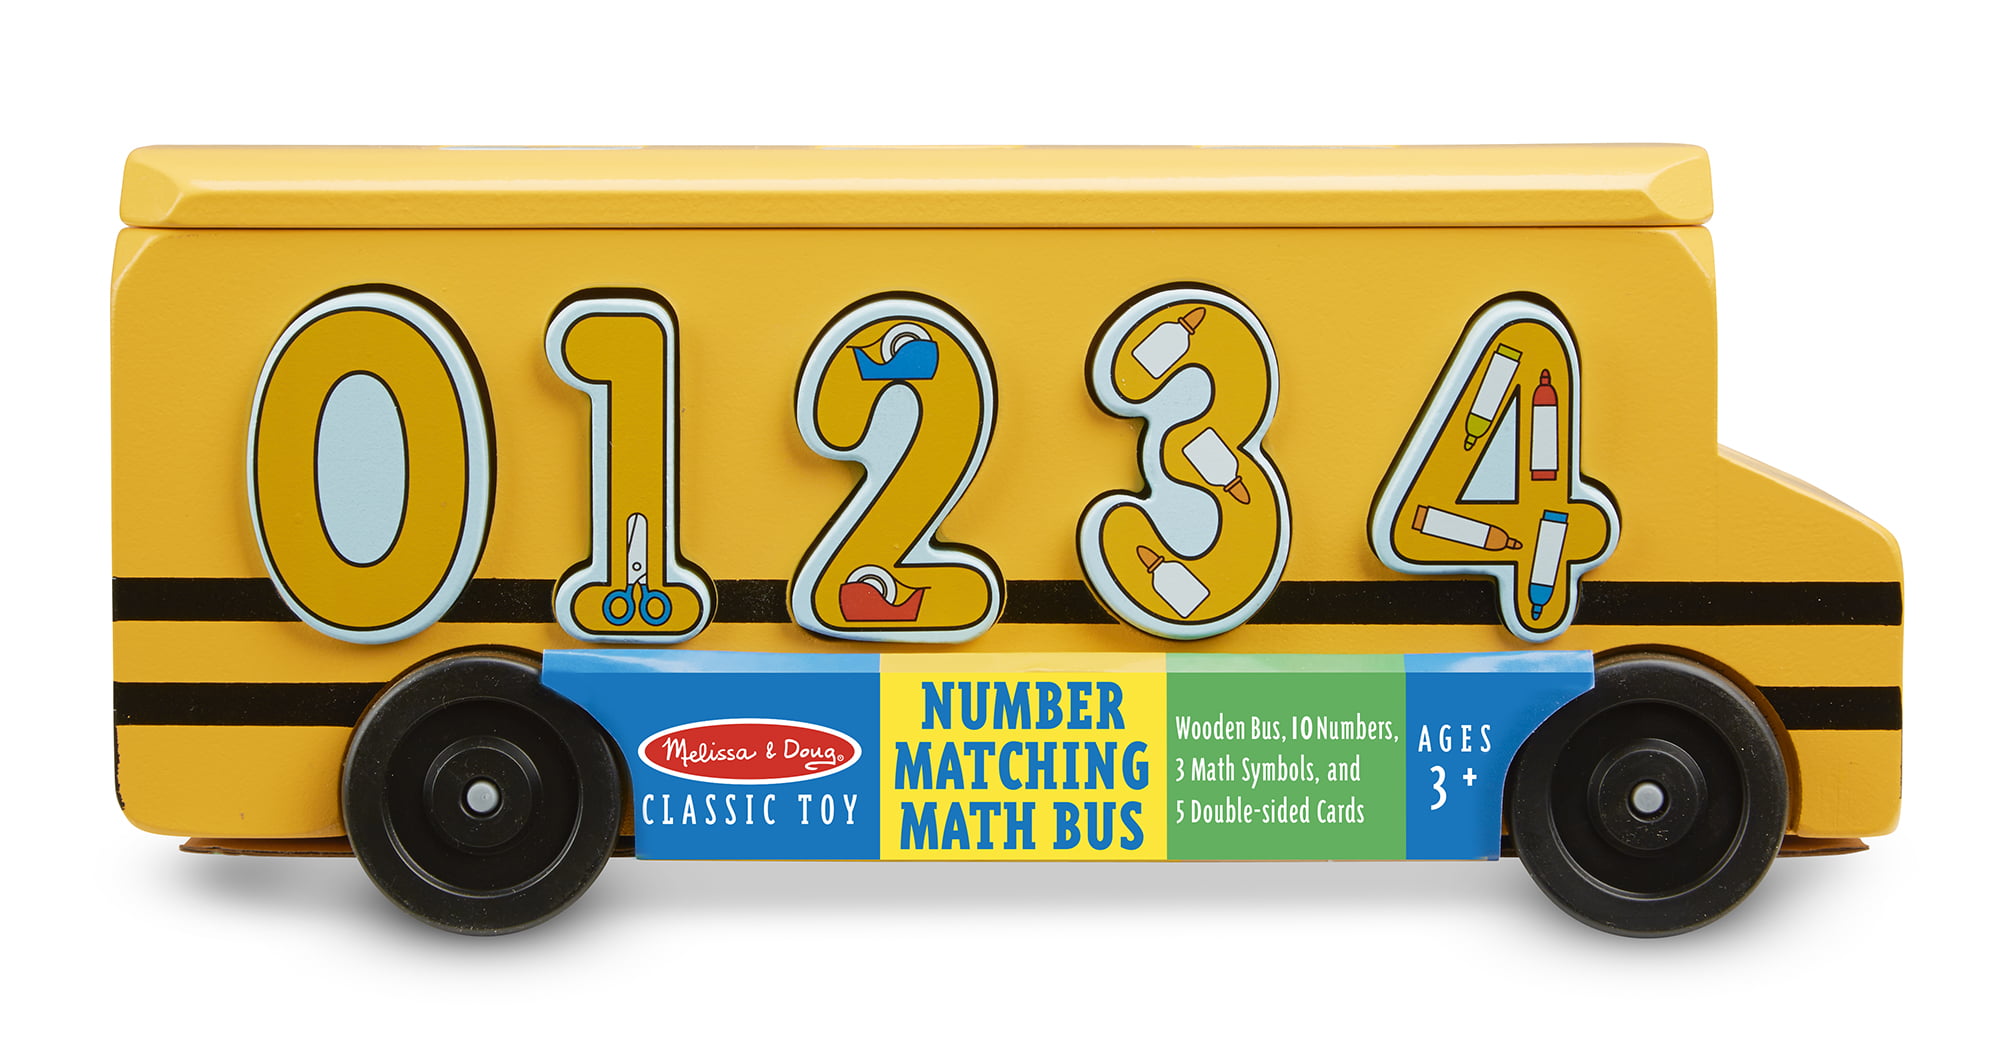 Educational Toy With 10 Numbers 3 for sale online Melissa & Doug Number Matching Math Bus 